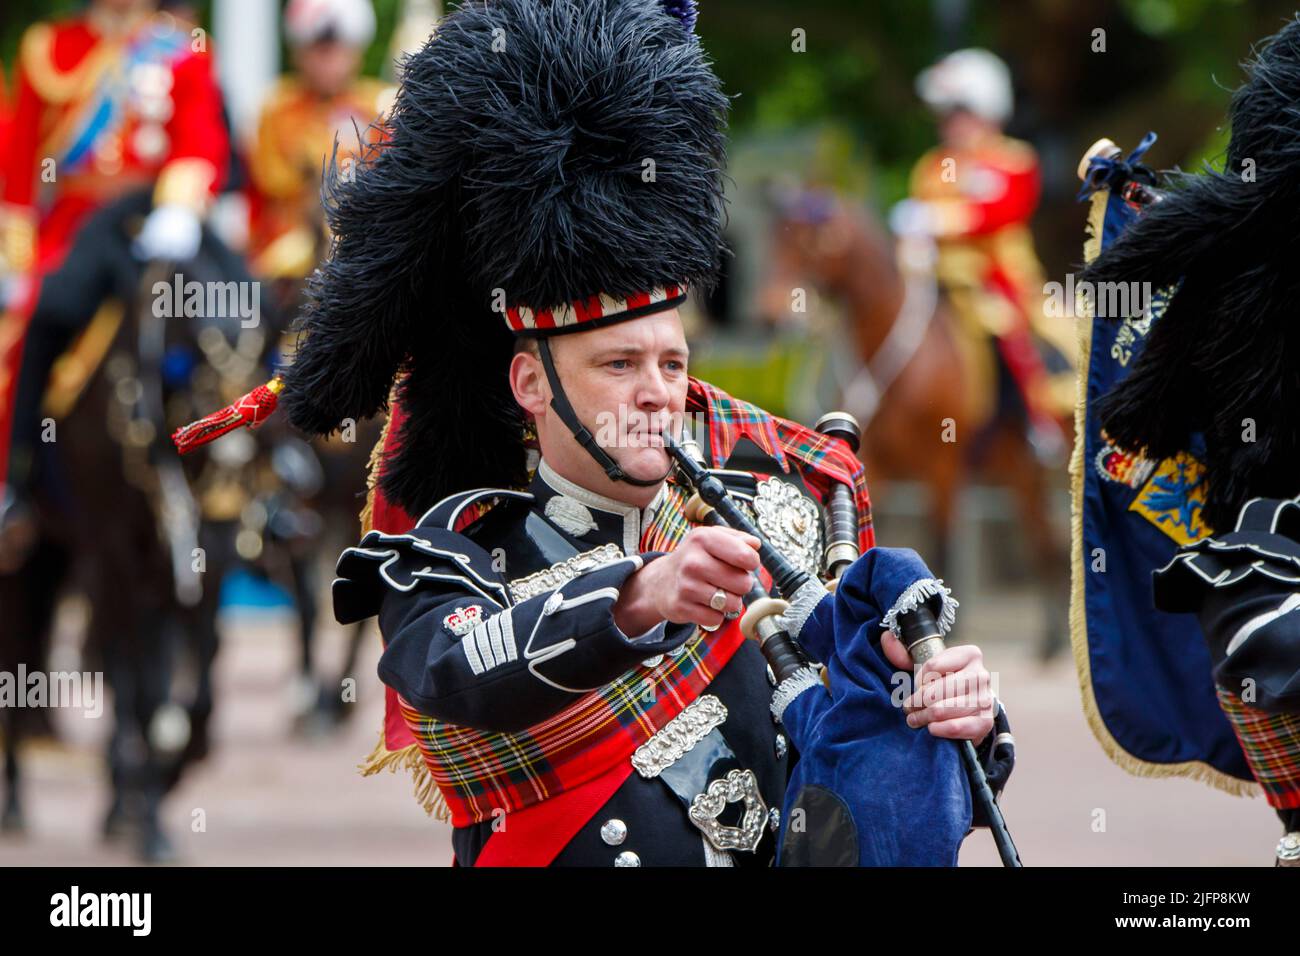 Scots Guards musician at Trooping the Colour, Colonel’s Review in The Mall, London, England, United Kingdom on Saturday, May 28, 2022. Stock Photo